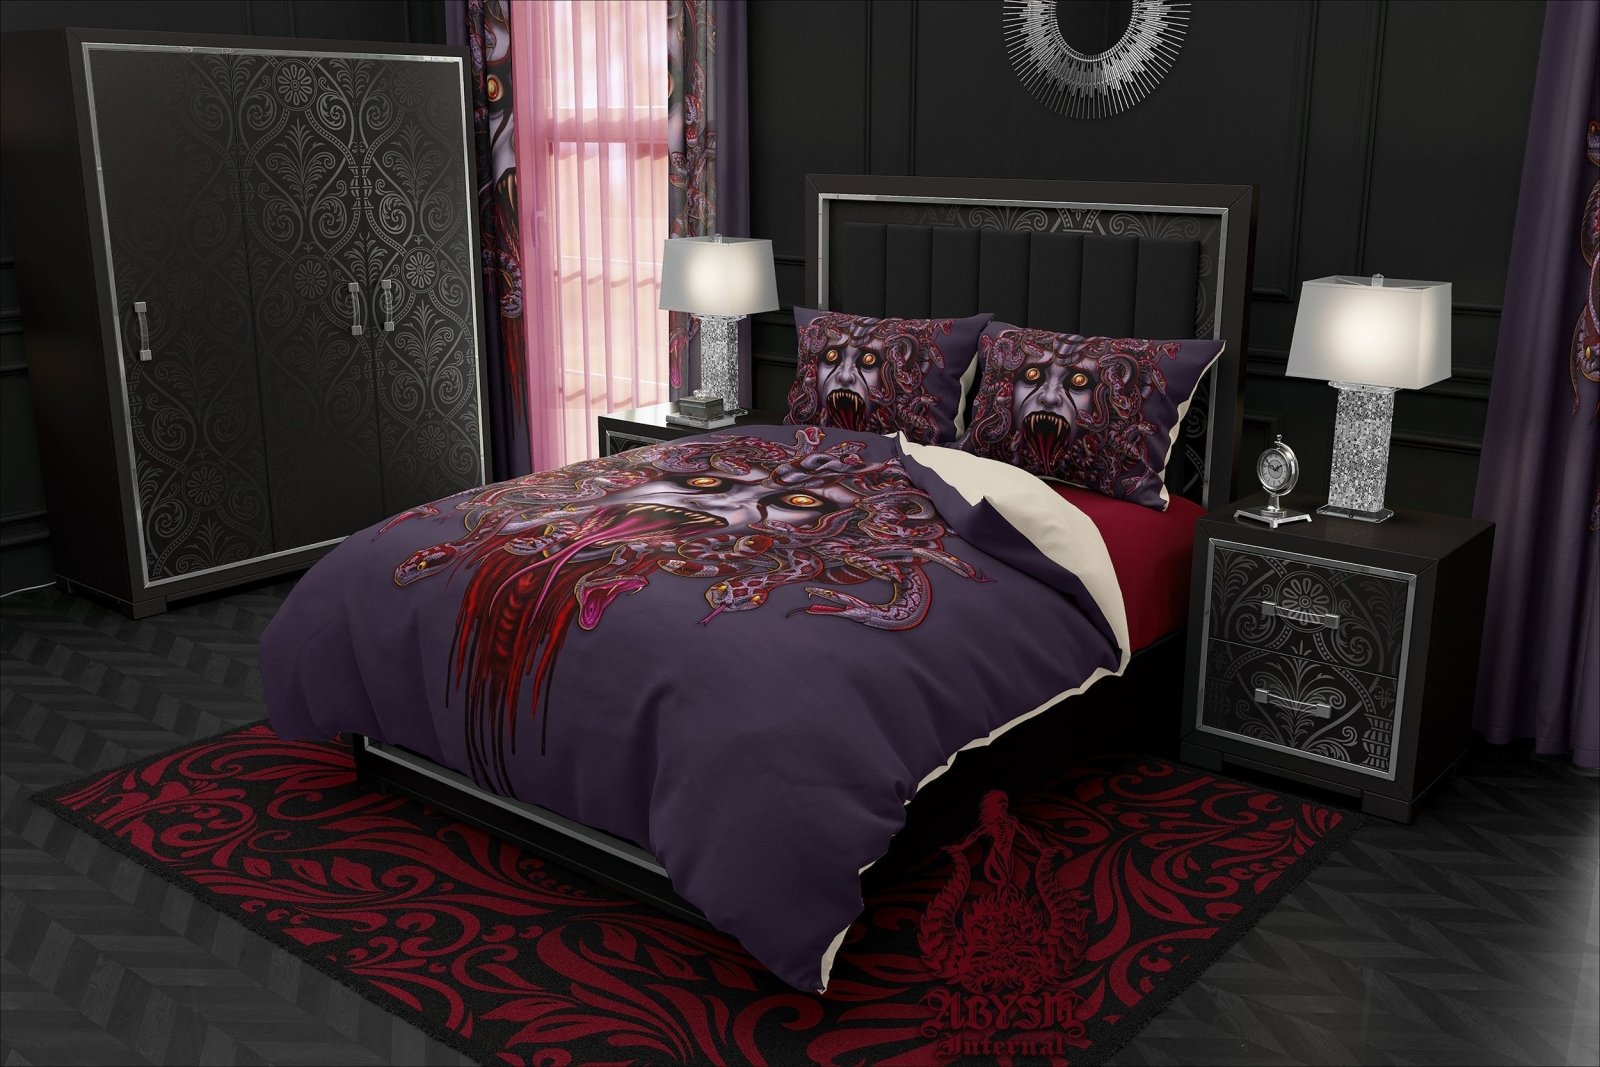 Bloody Bedding Set, Comforter and Duvet, Ash Medusa, Horror Bed Cover and Bedroom Decor, King, Queen and Twin Size - 3 Faces - Abysm Internal